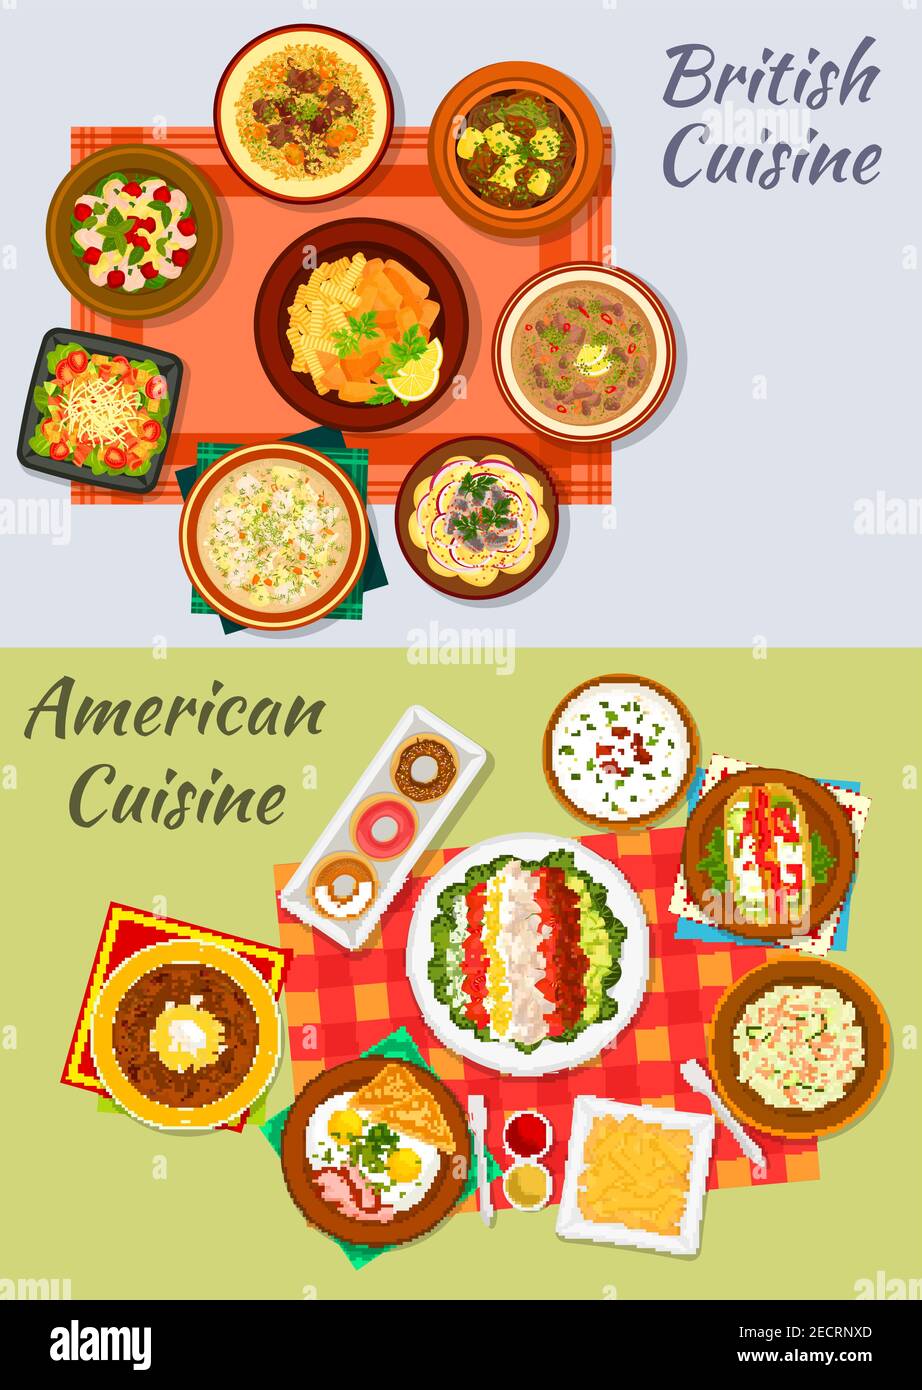 American and british cuisine dishes icon with fast food hot dog, fries, fish and chips, donut, fried egg with bacon, vegetable salads, irish stew, kid Stock Vector